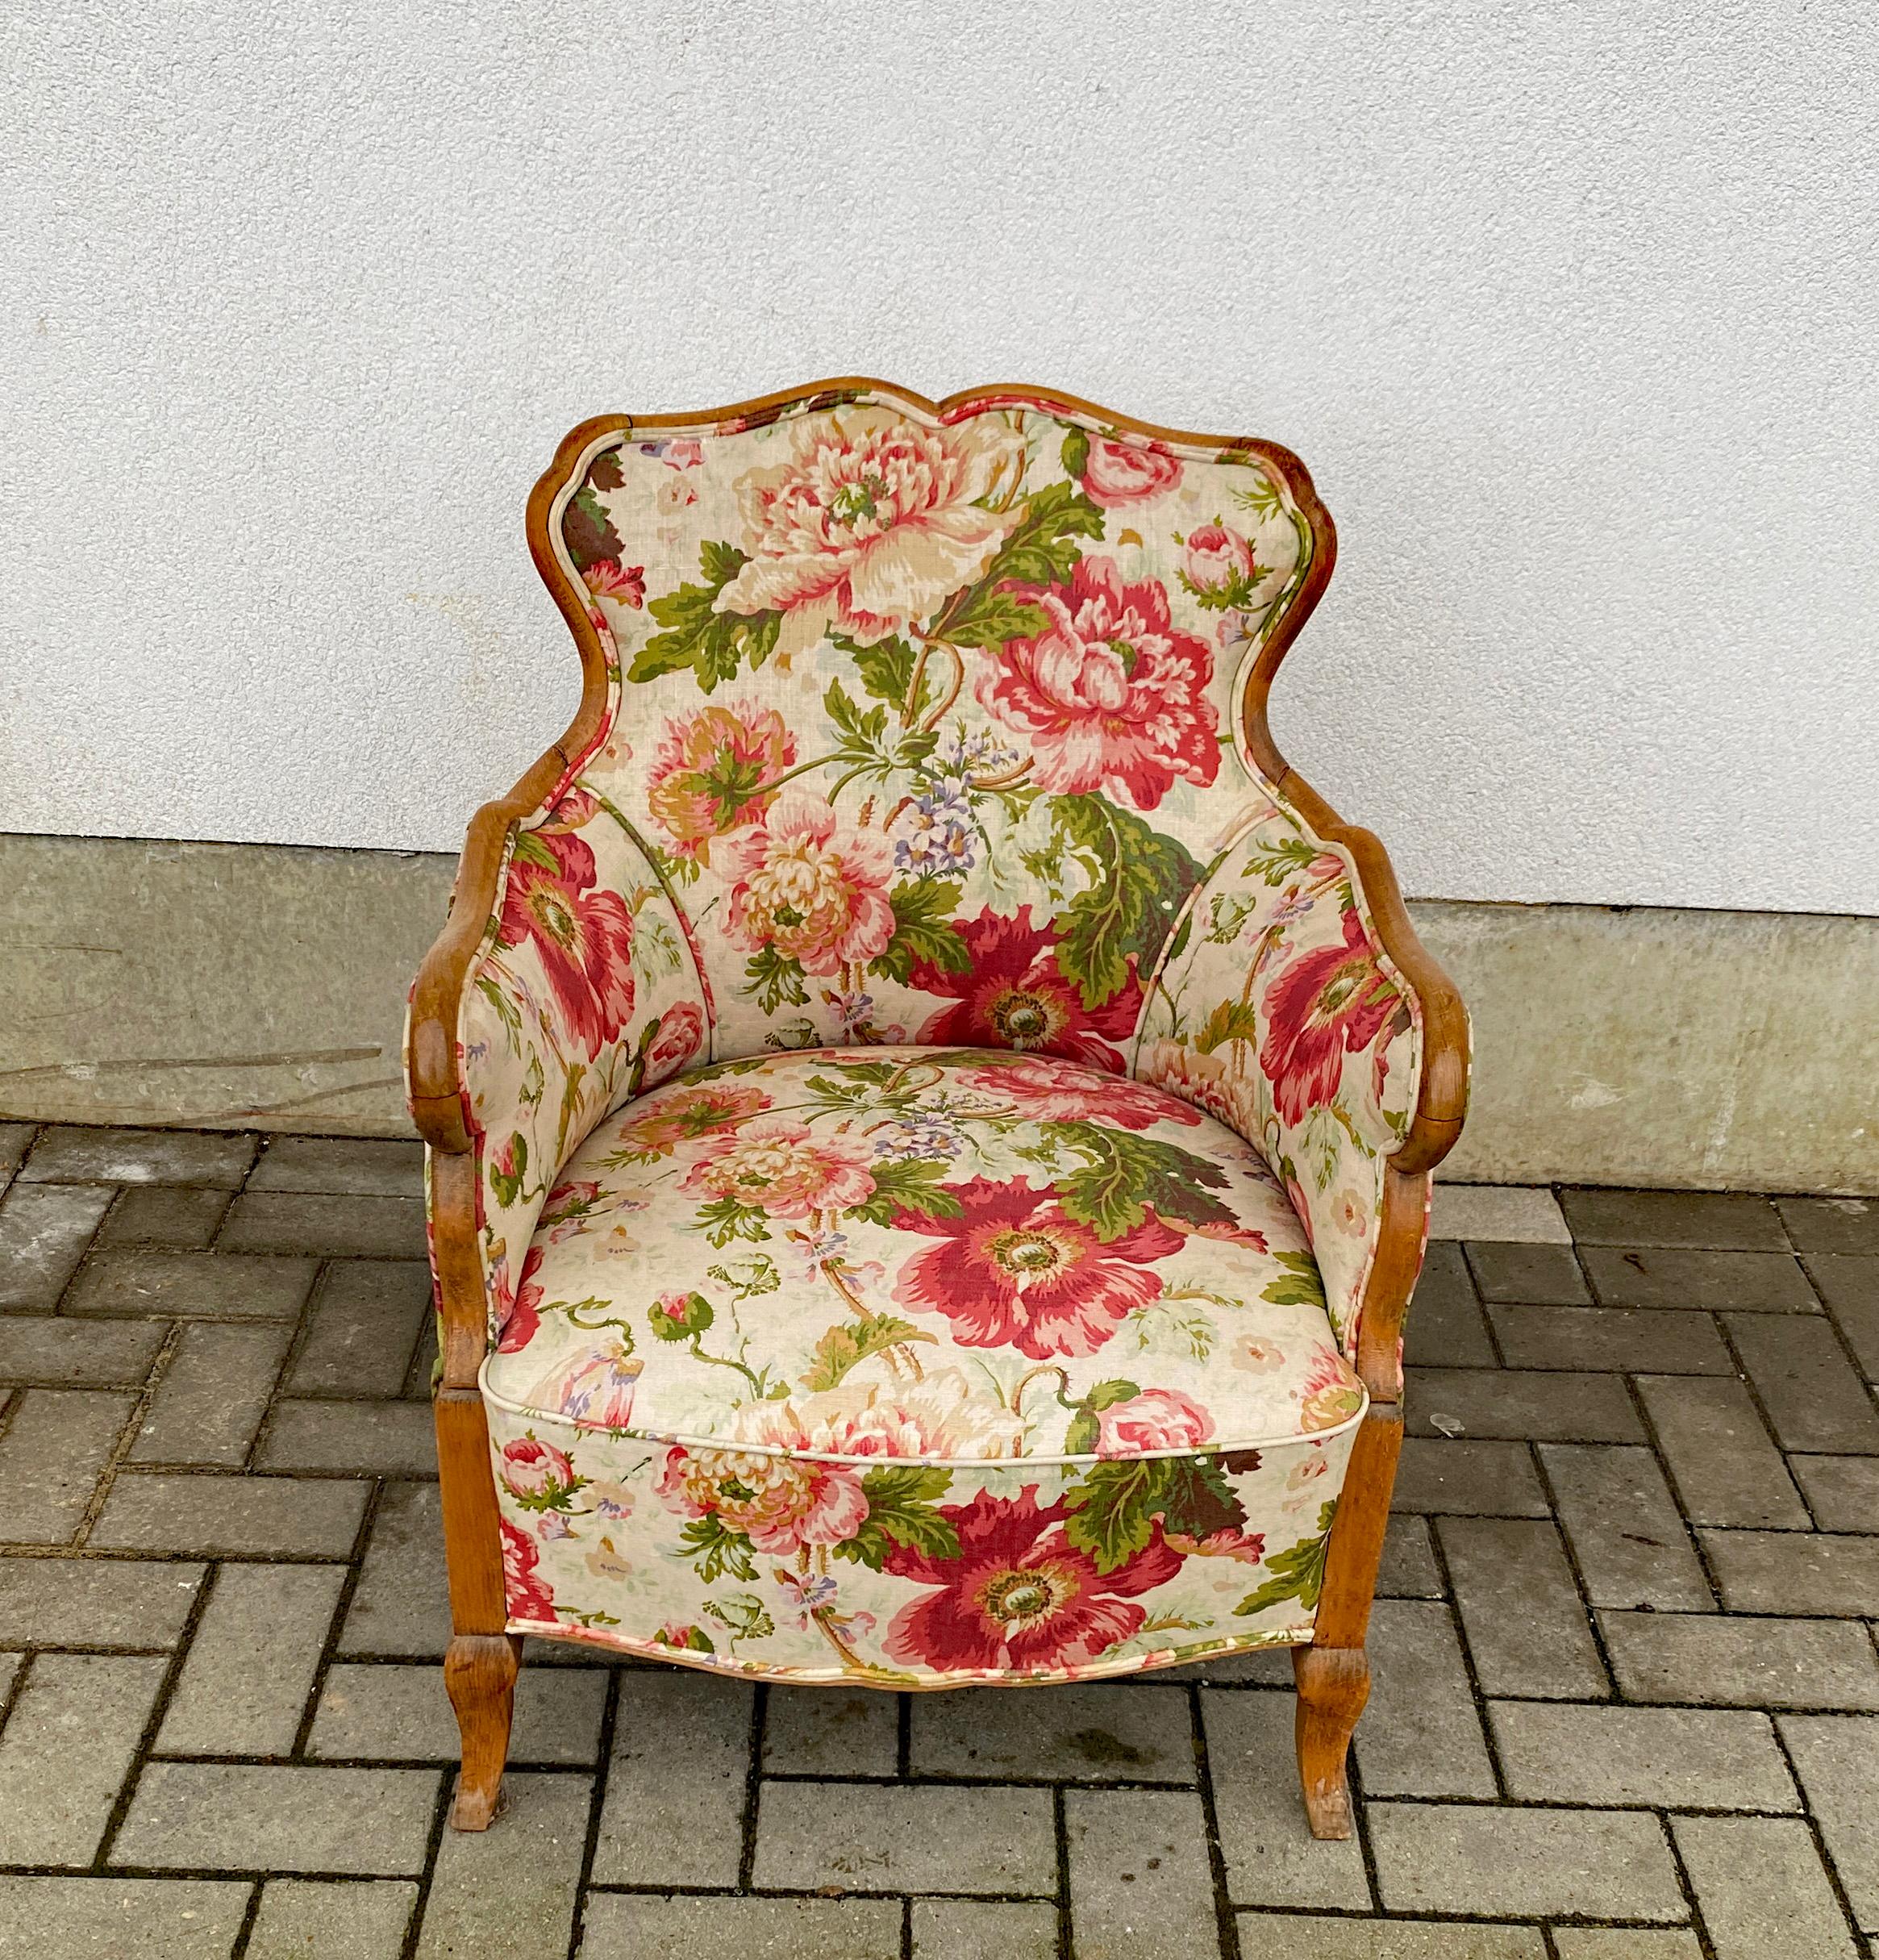 Louis XV style armchair, recently redone fabric
good condition